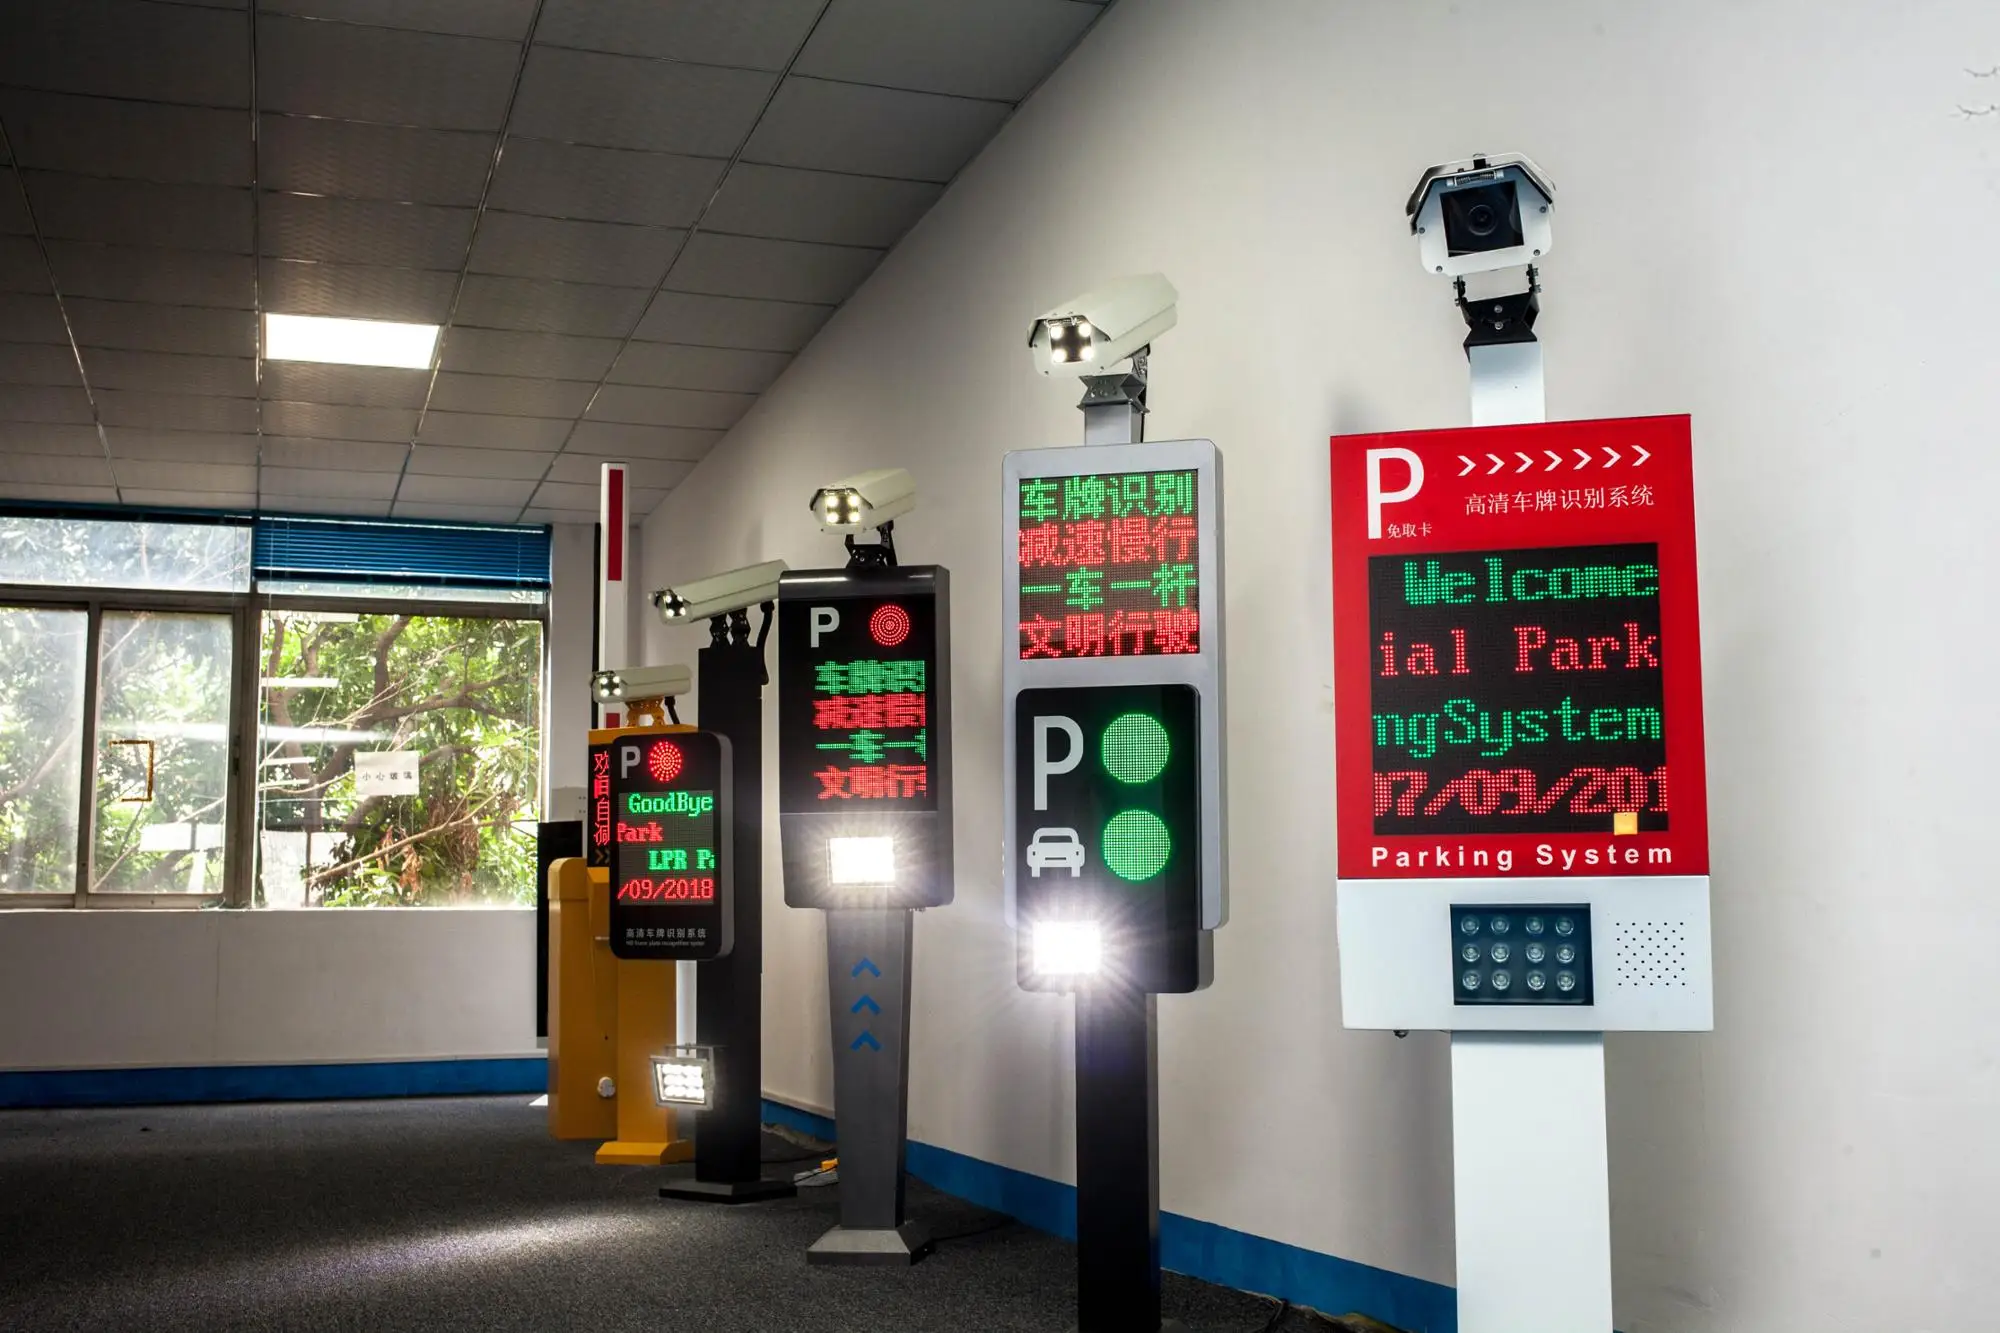 Car number plate reading recognition by camera and record in access control management